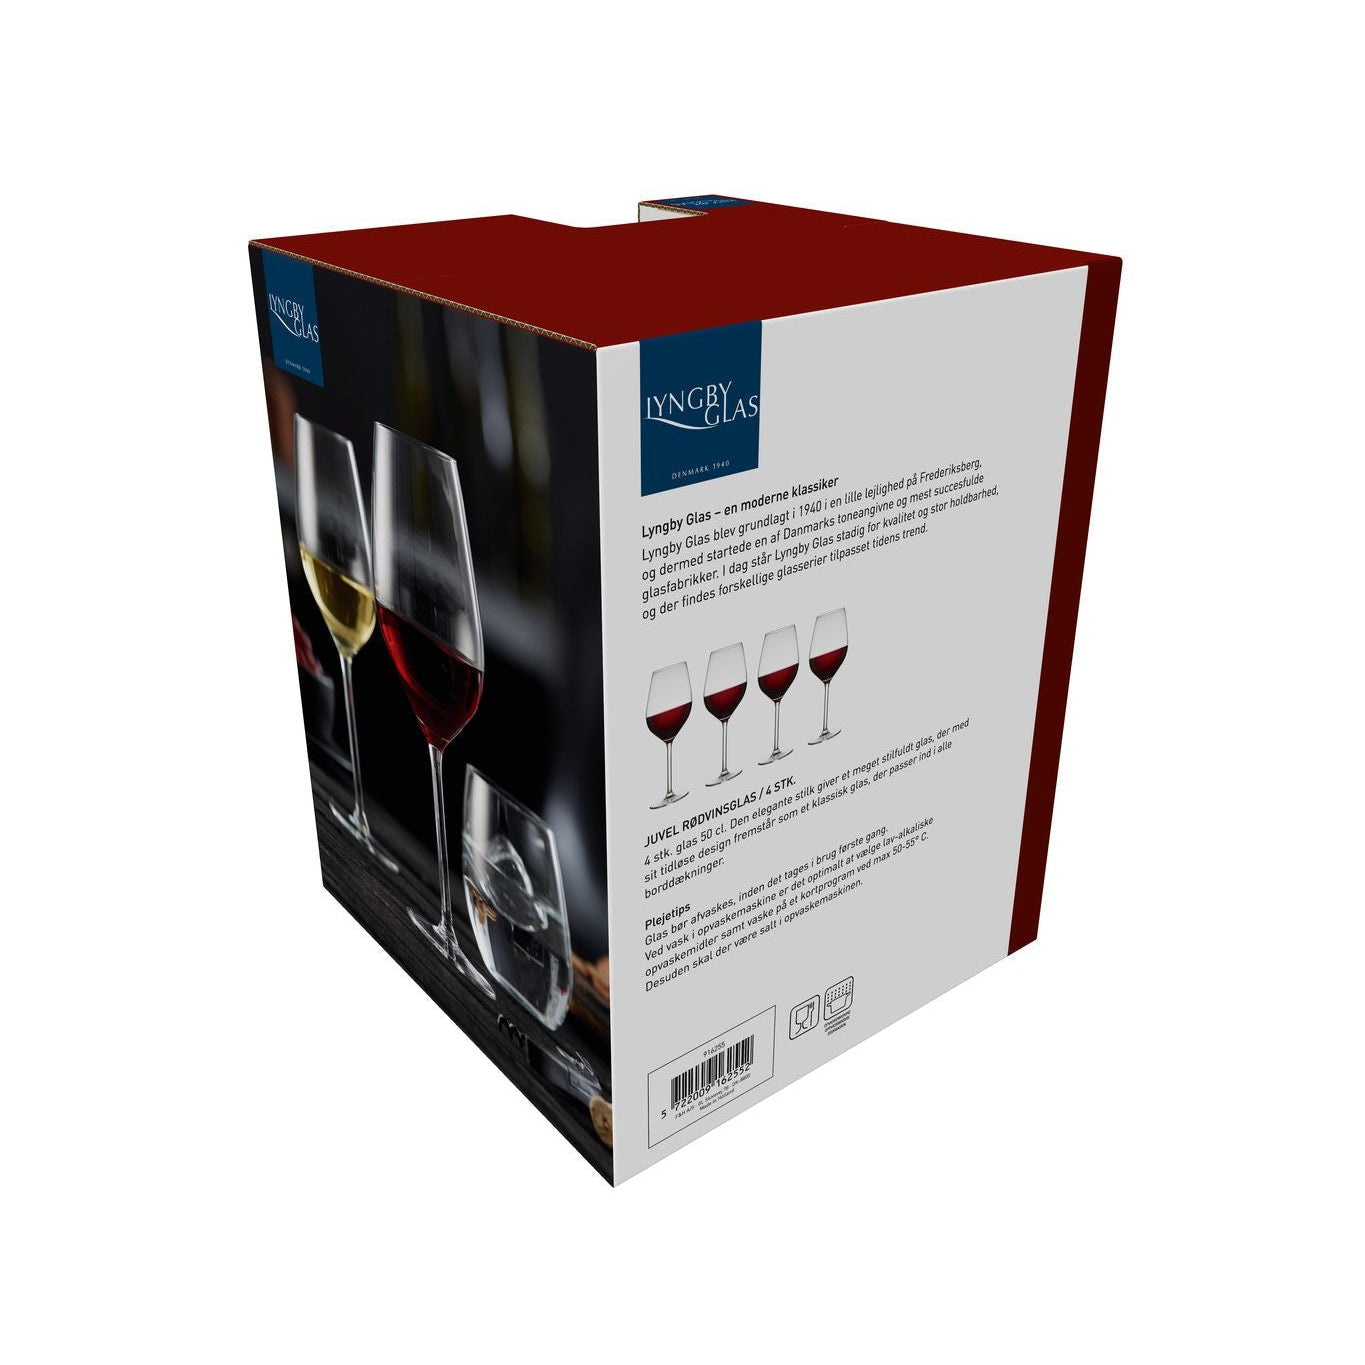 Lyngby Glas Juvel Red Wine Glass 50 CL, 4 pezzi.